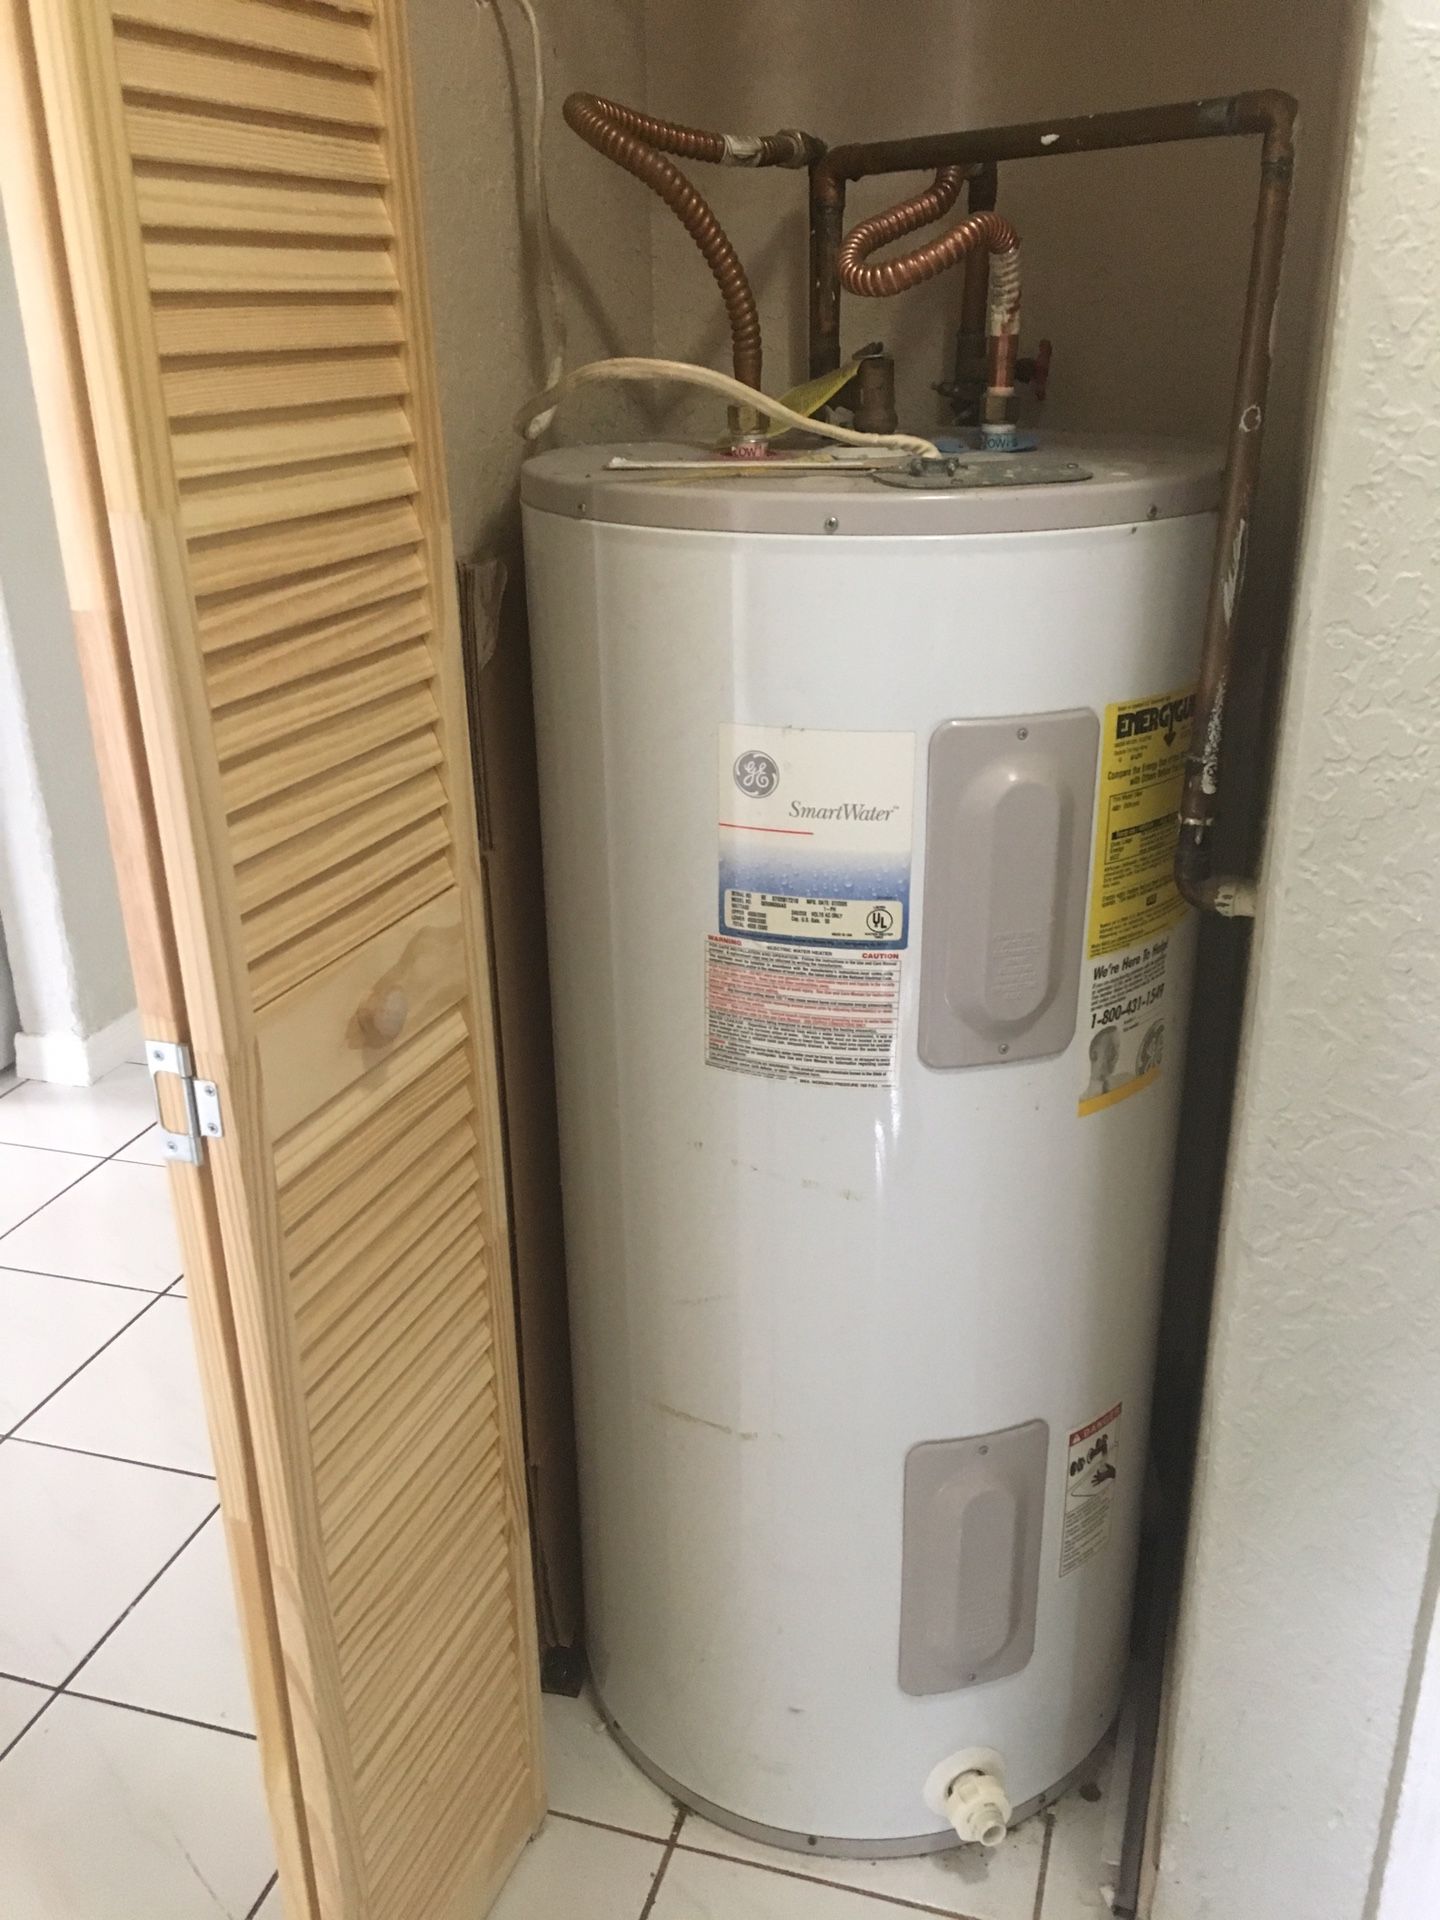 GE Smartwater electric water heater